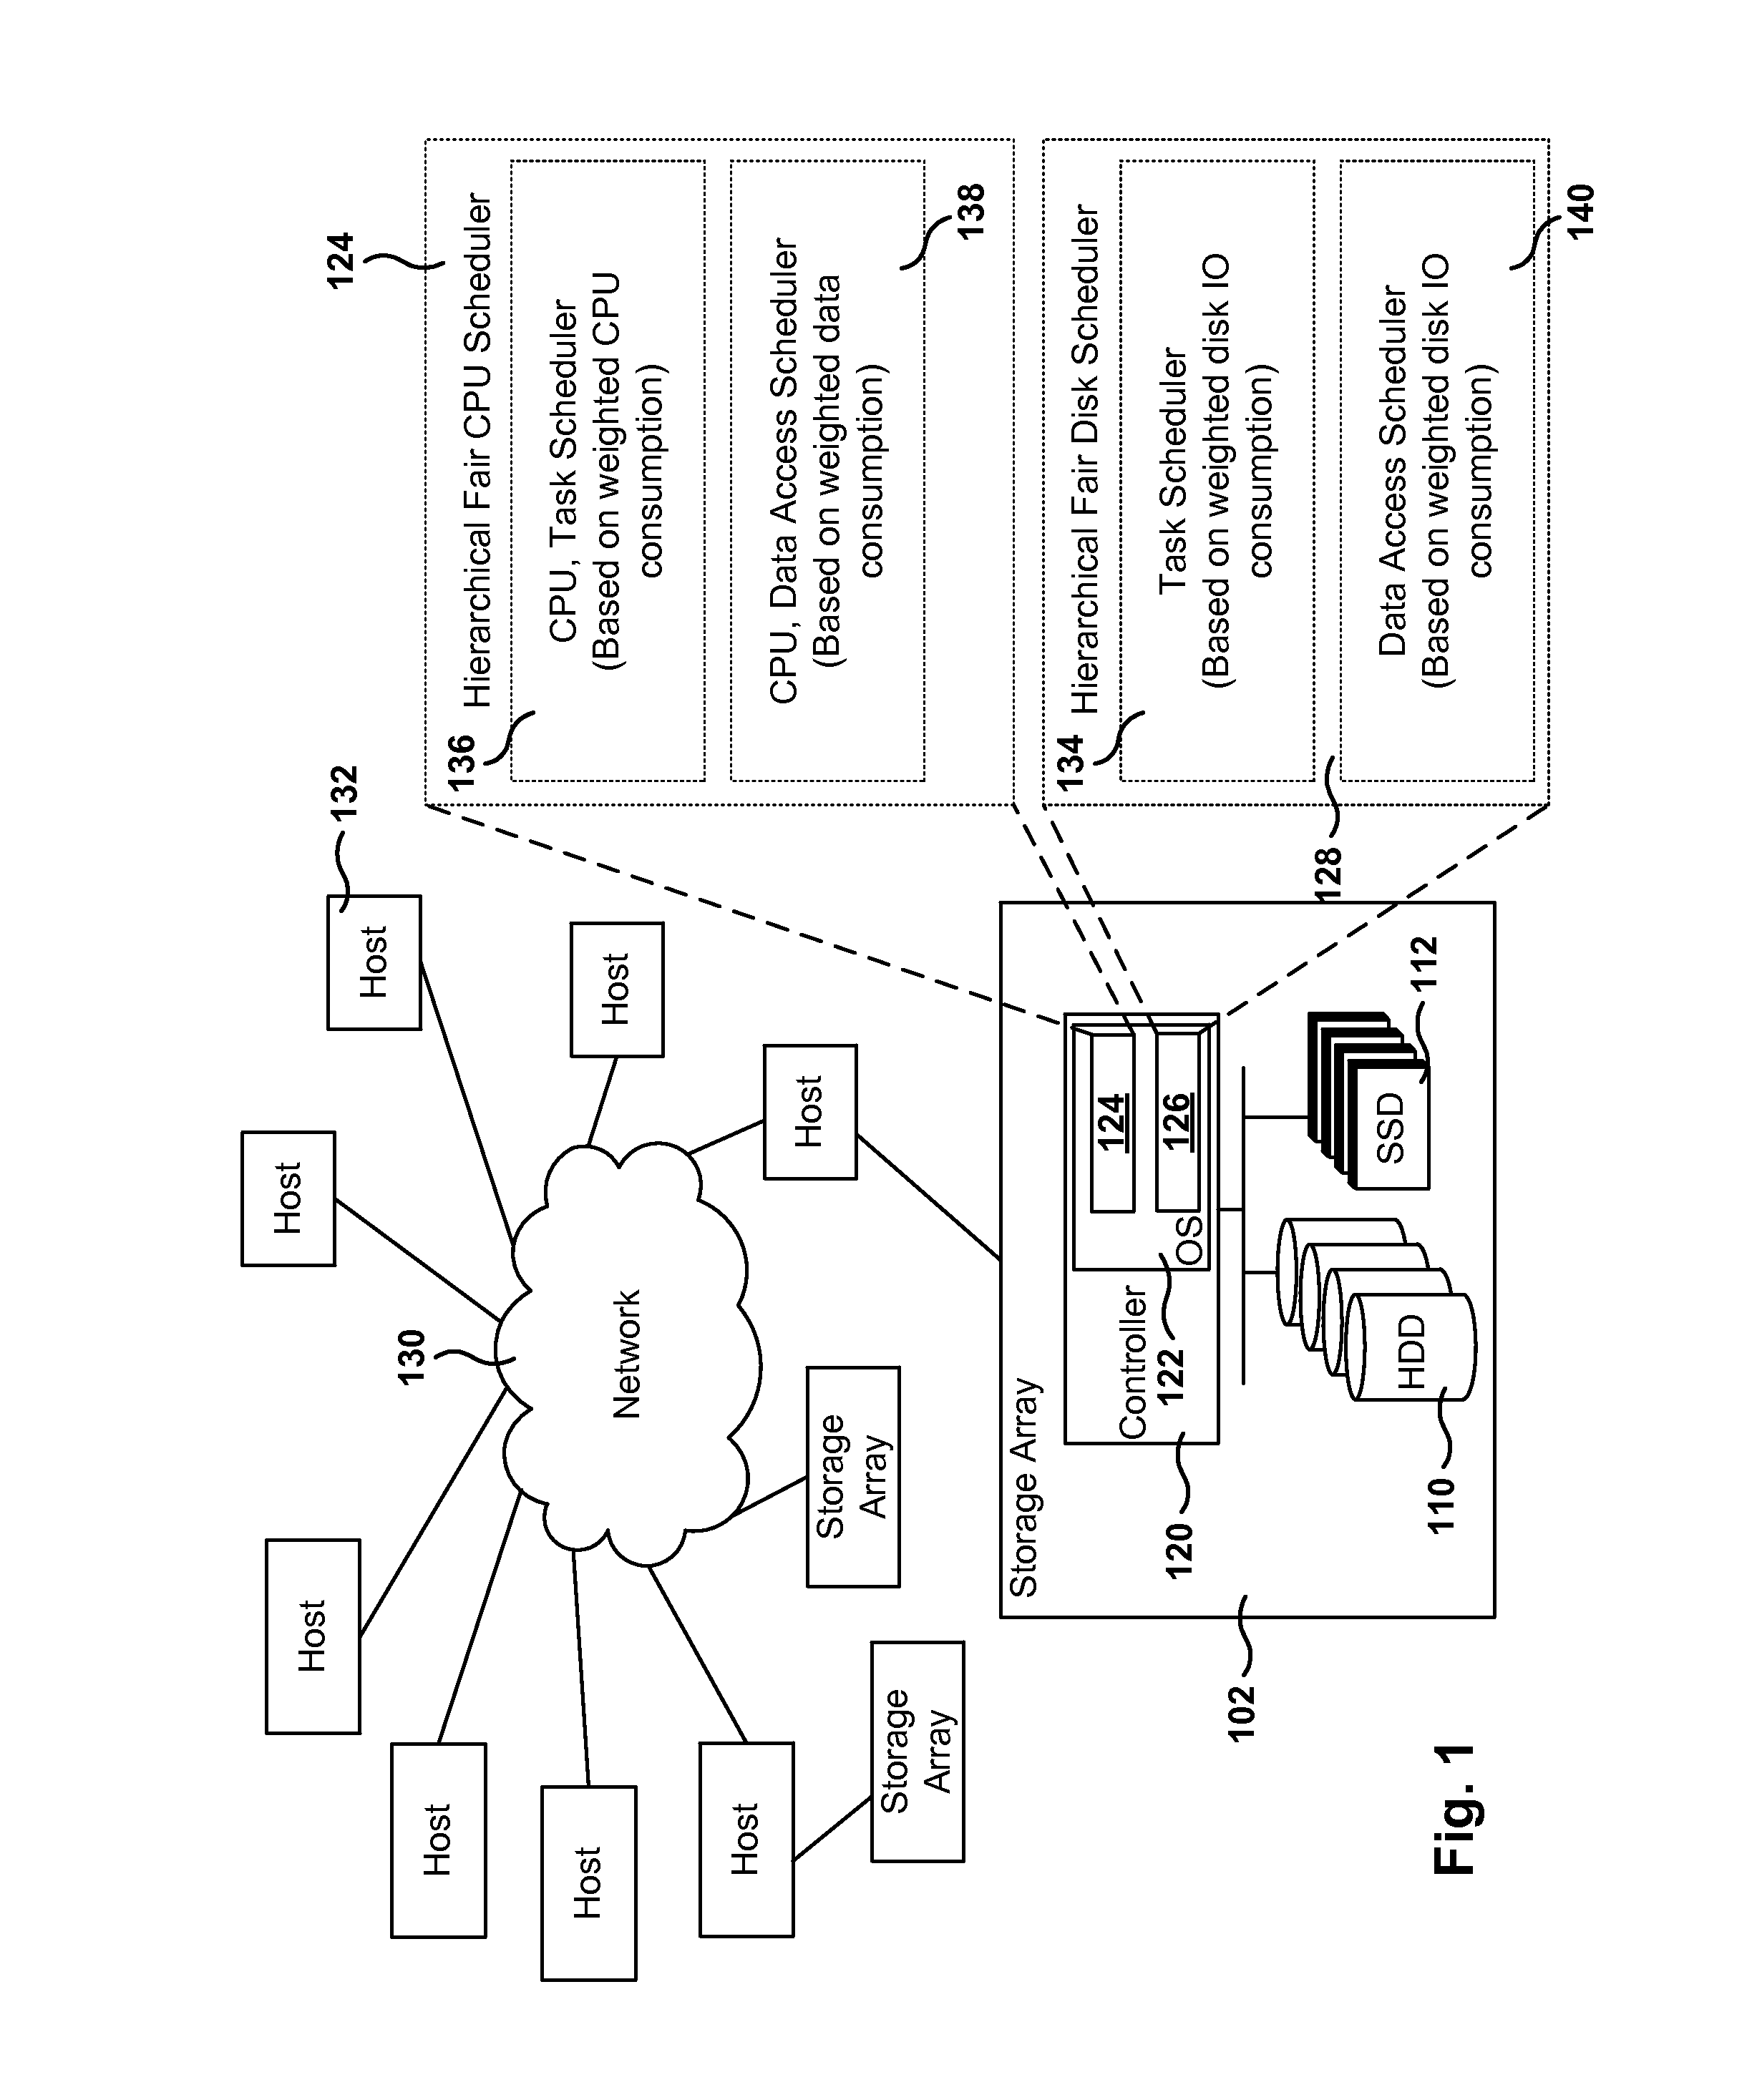 Congestion avoidance in network storage device using dynamic weights